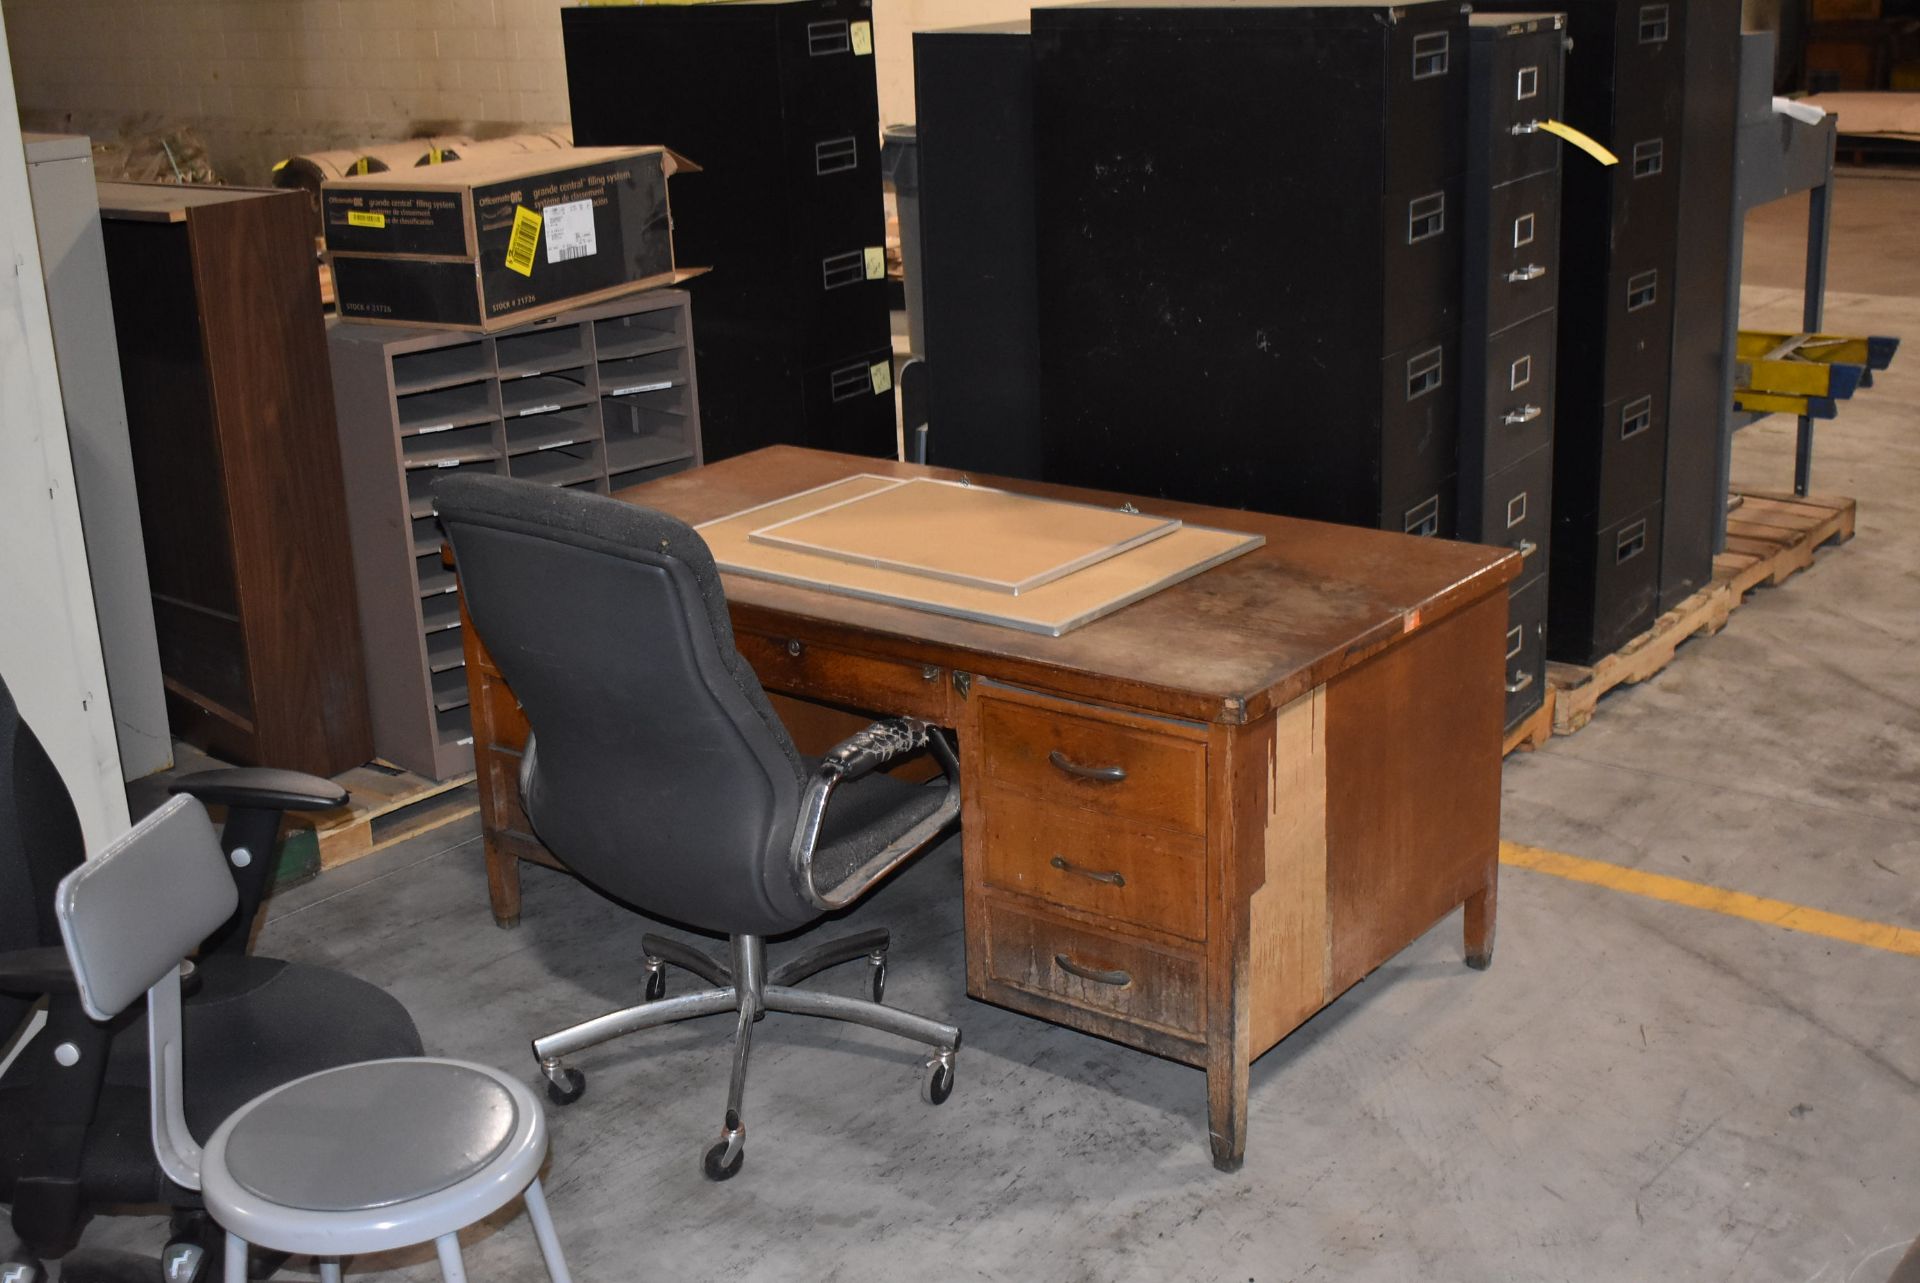 (Located in Mendota, IL) Office Furniture - Files, Desks, Related Items - Image 4 of 4